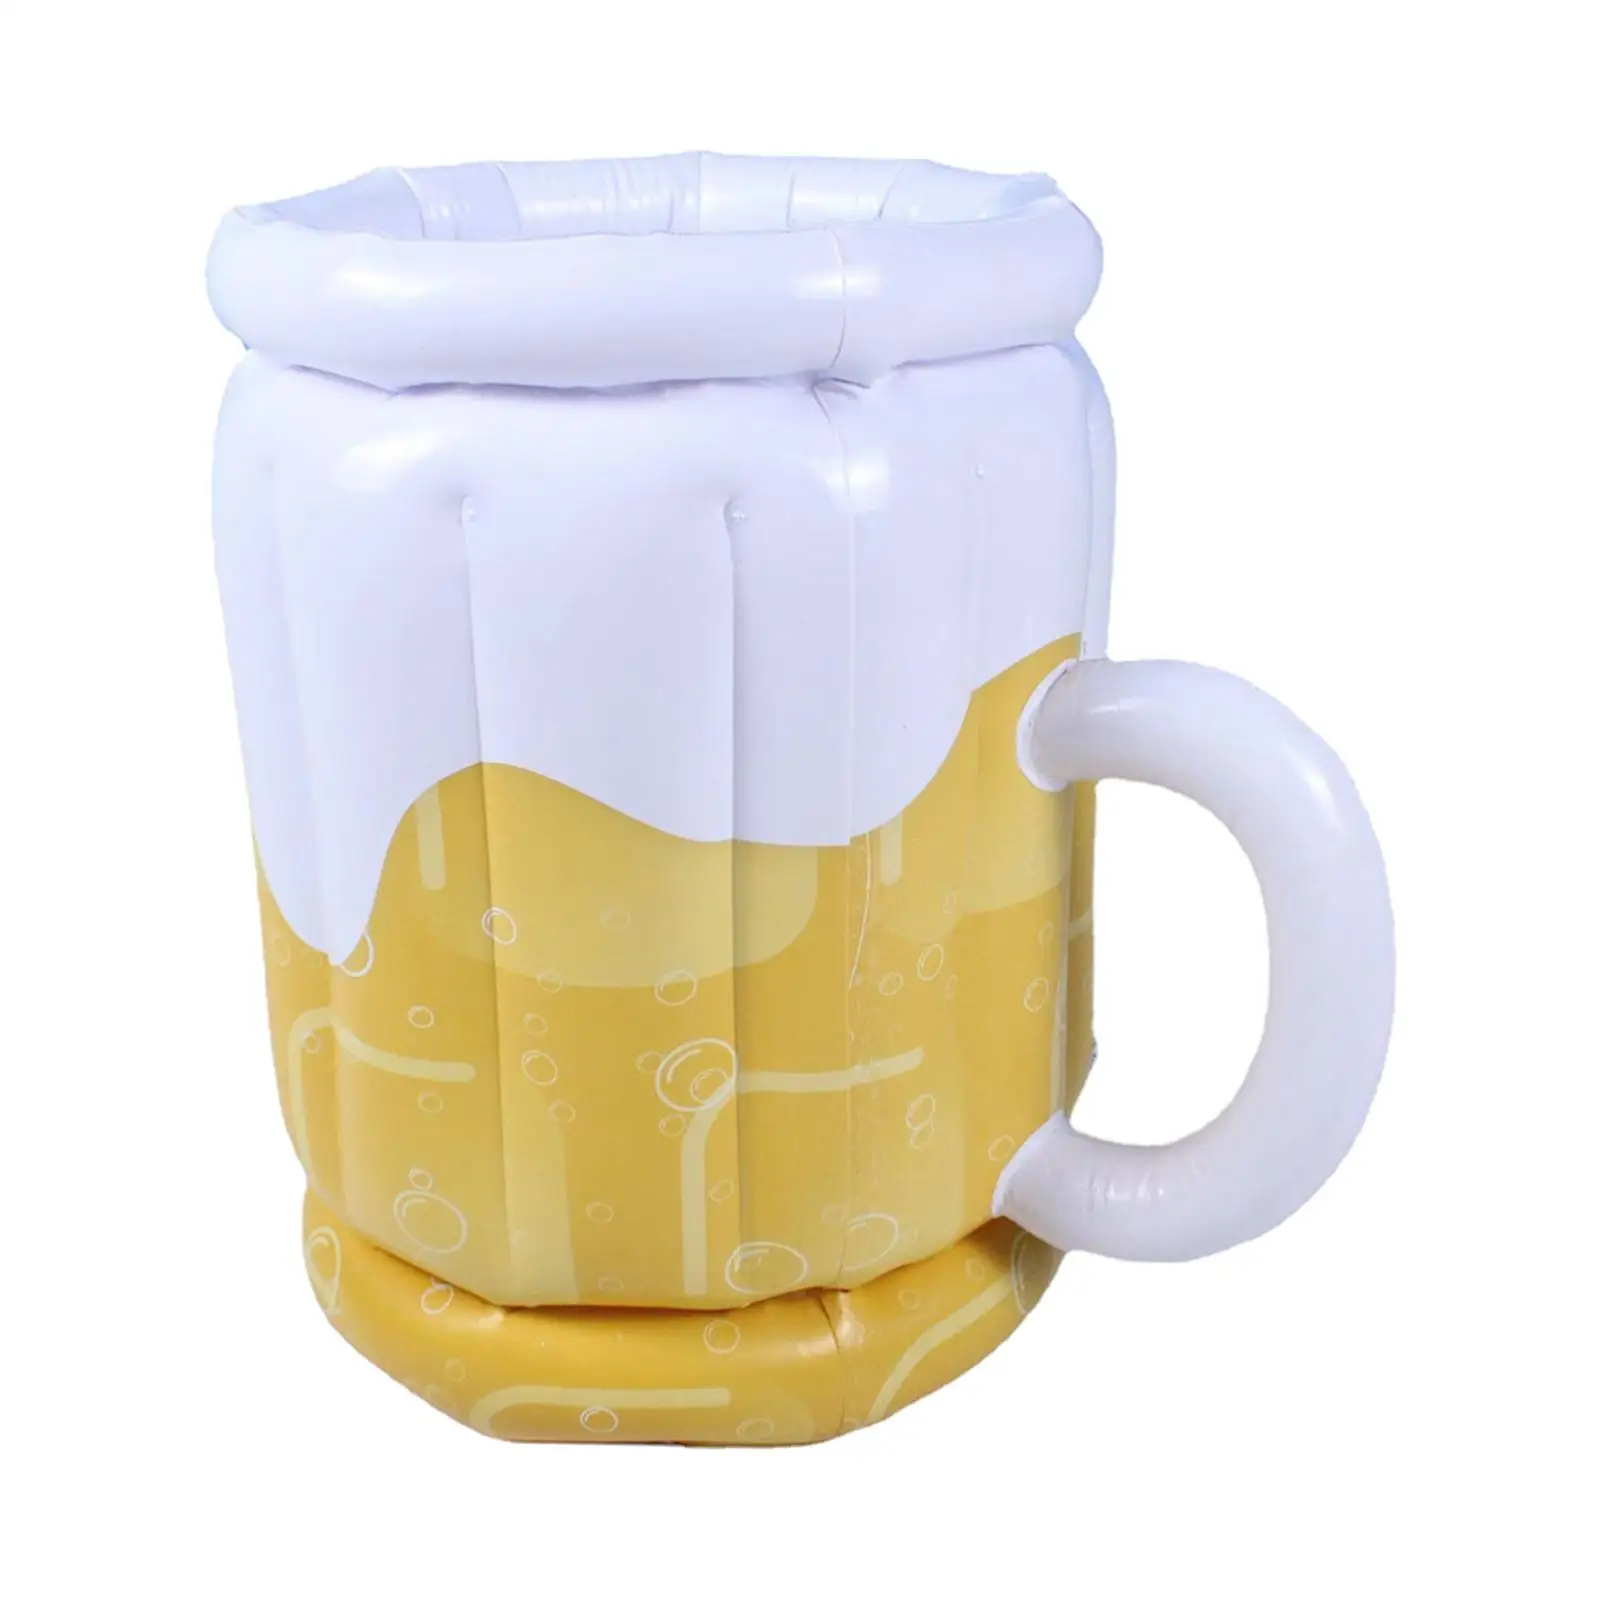 Inflatable Beer Mug Cooler Supplies Summer Beverage Holder Inflatable Drink Holder for Themed Party Picnic Beach Outdoor BBQ